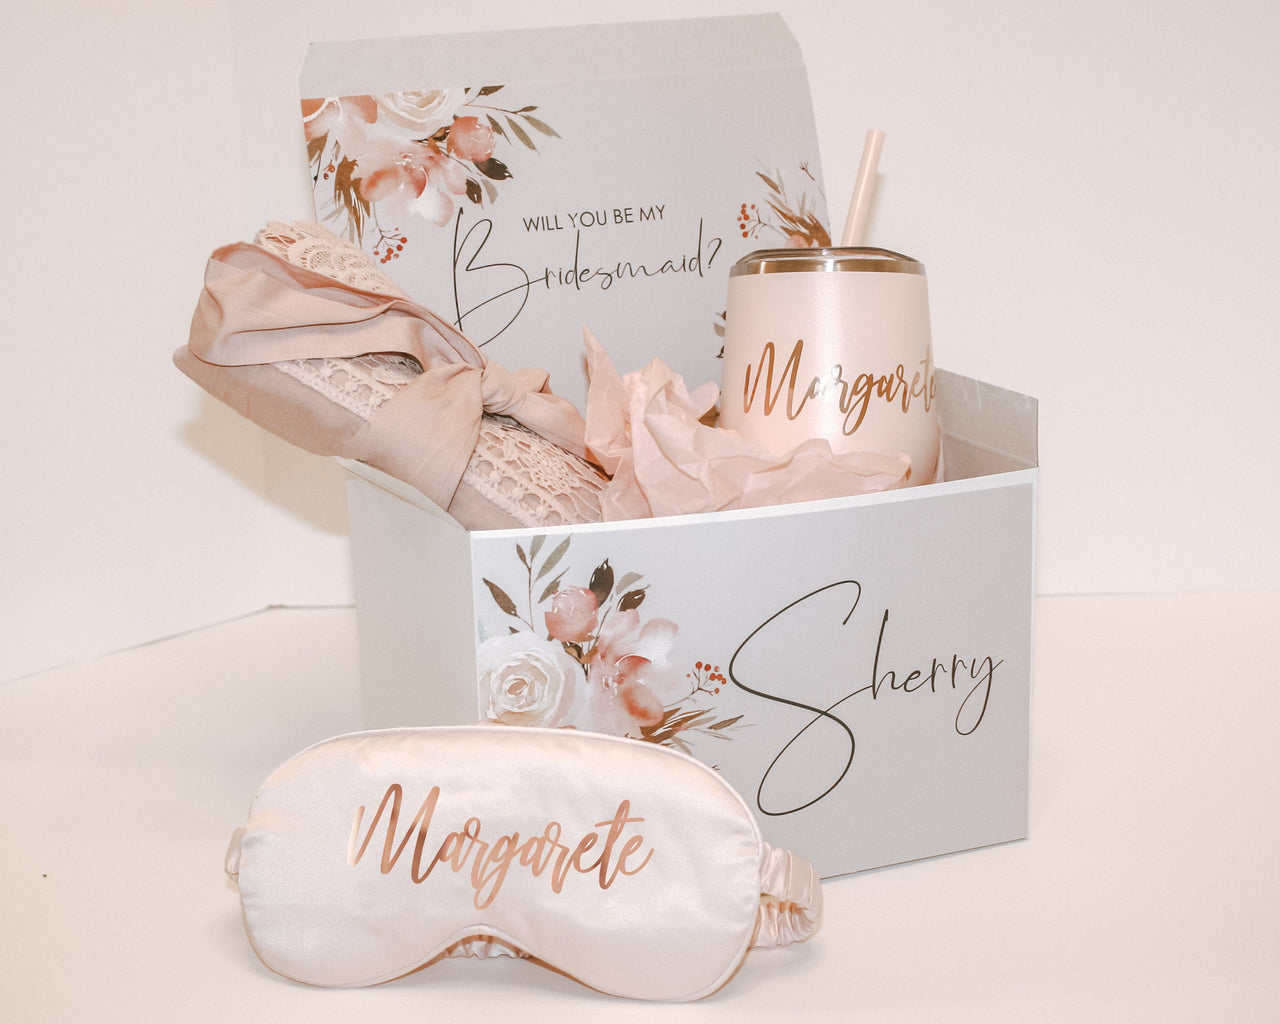 Personalized Bridesmaid Proposal Gift Box Set with Robe, Sleepmask, Wine Tumbler and custom gift box, Self Care Gift Box Set for her